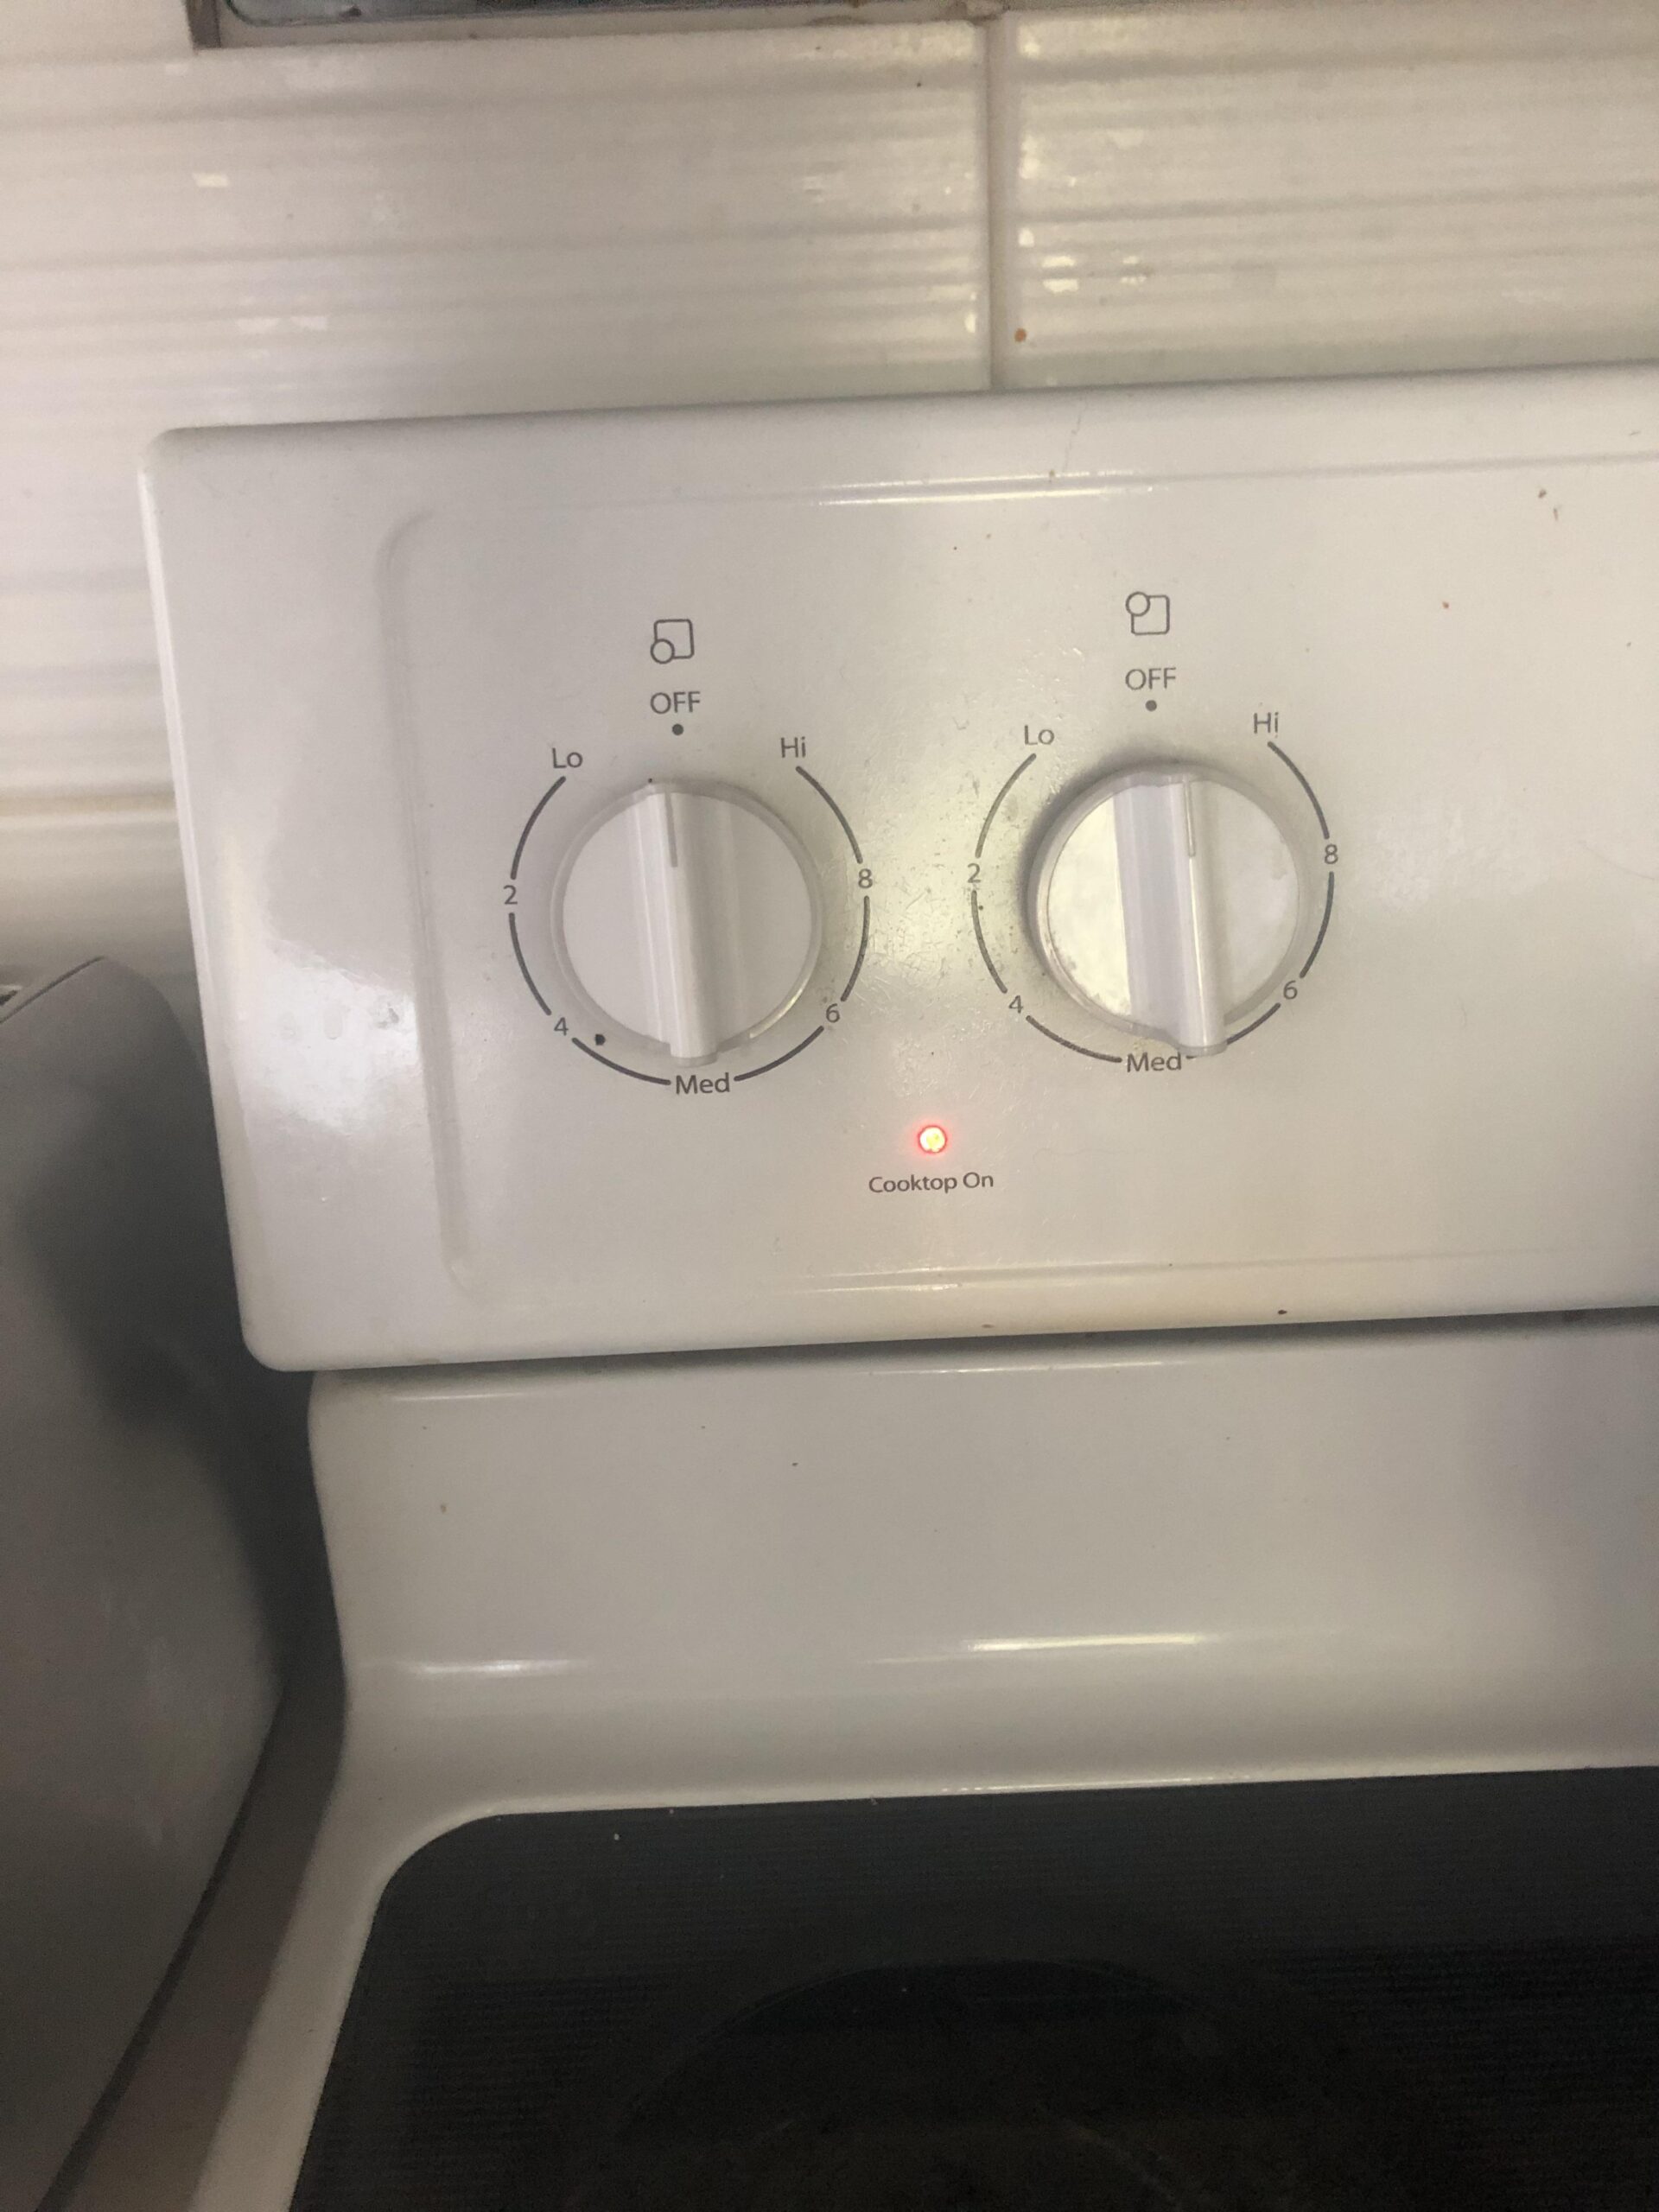 How to Turn off Cooktop on Light